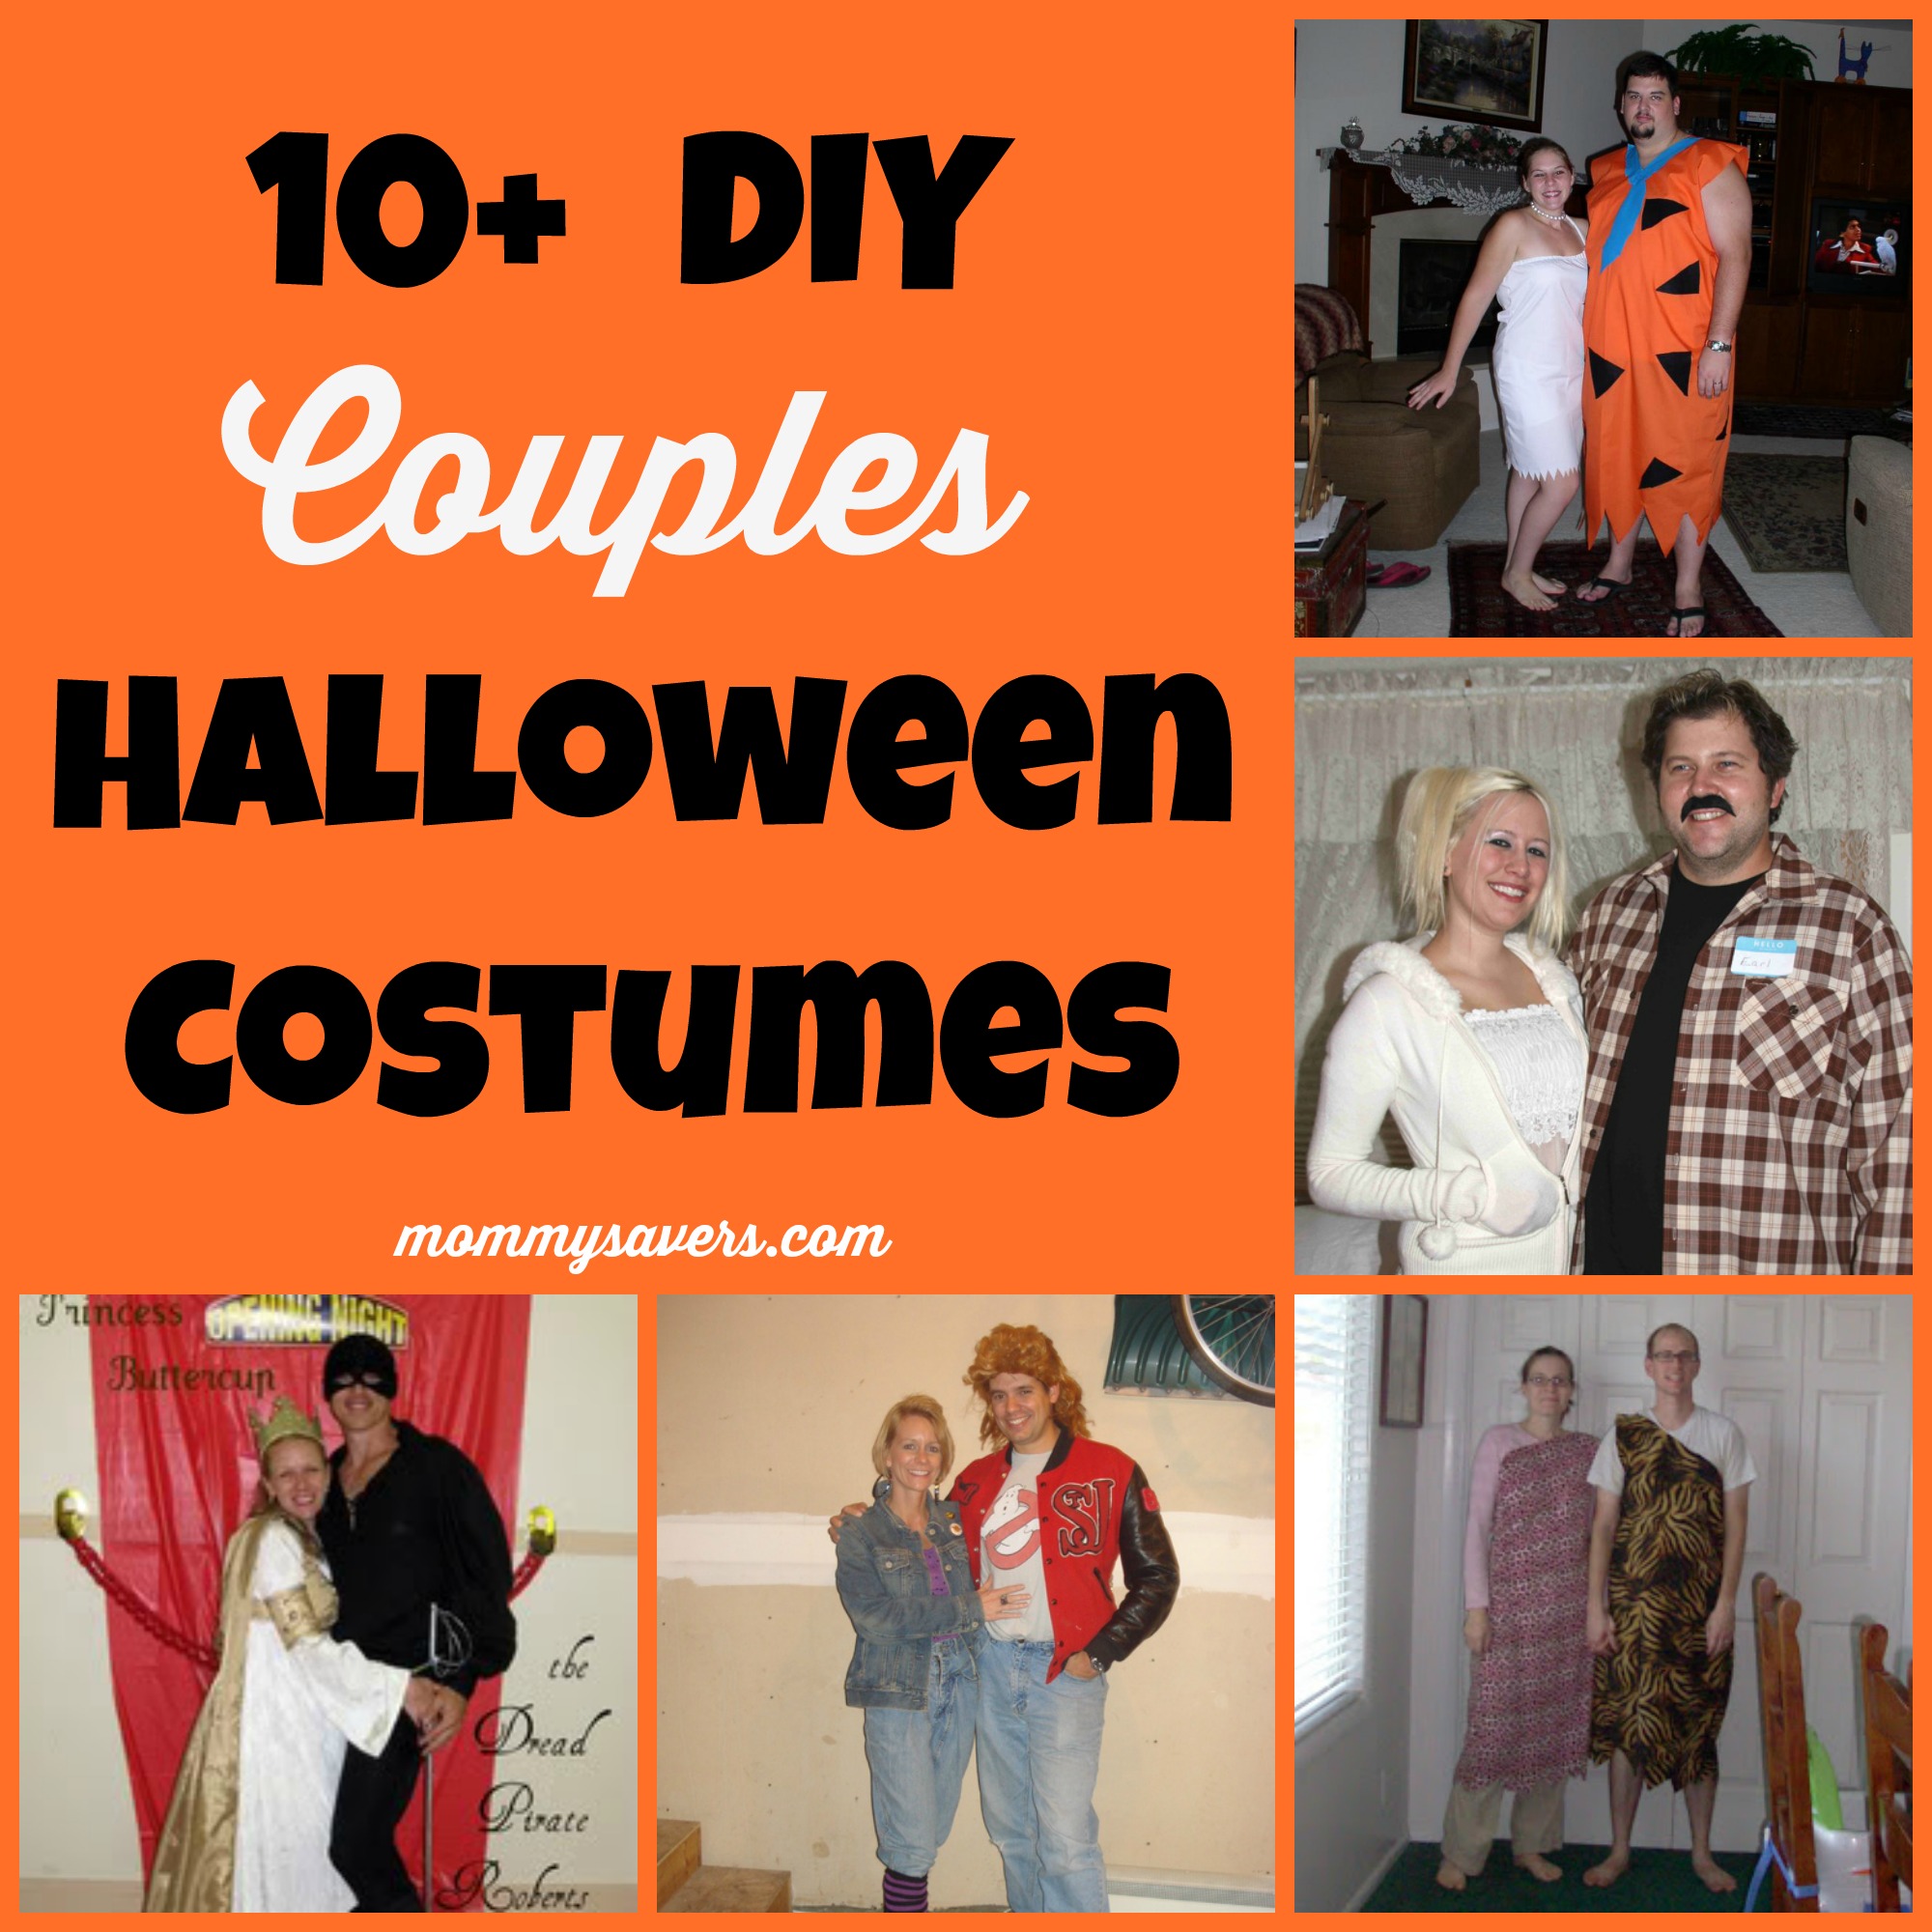 halloween  occasions for projects  diy diy  couples halloween costumes special couples costumes fashion diy